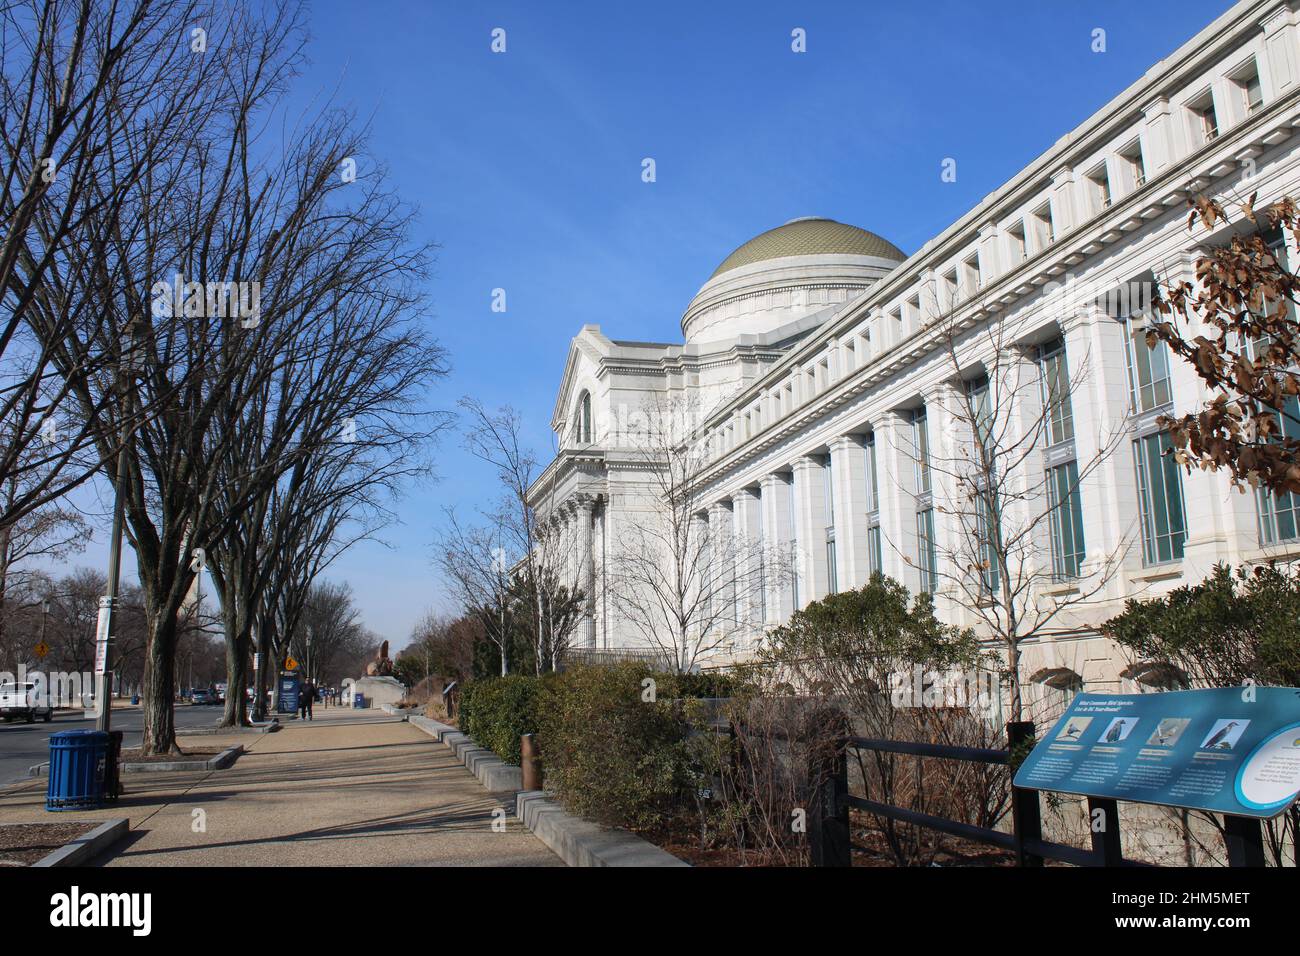 Entrance of the National Museum of Natural History, a Smithsonian Museum, in Washington, DC Stock Photo